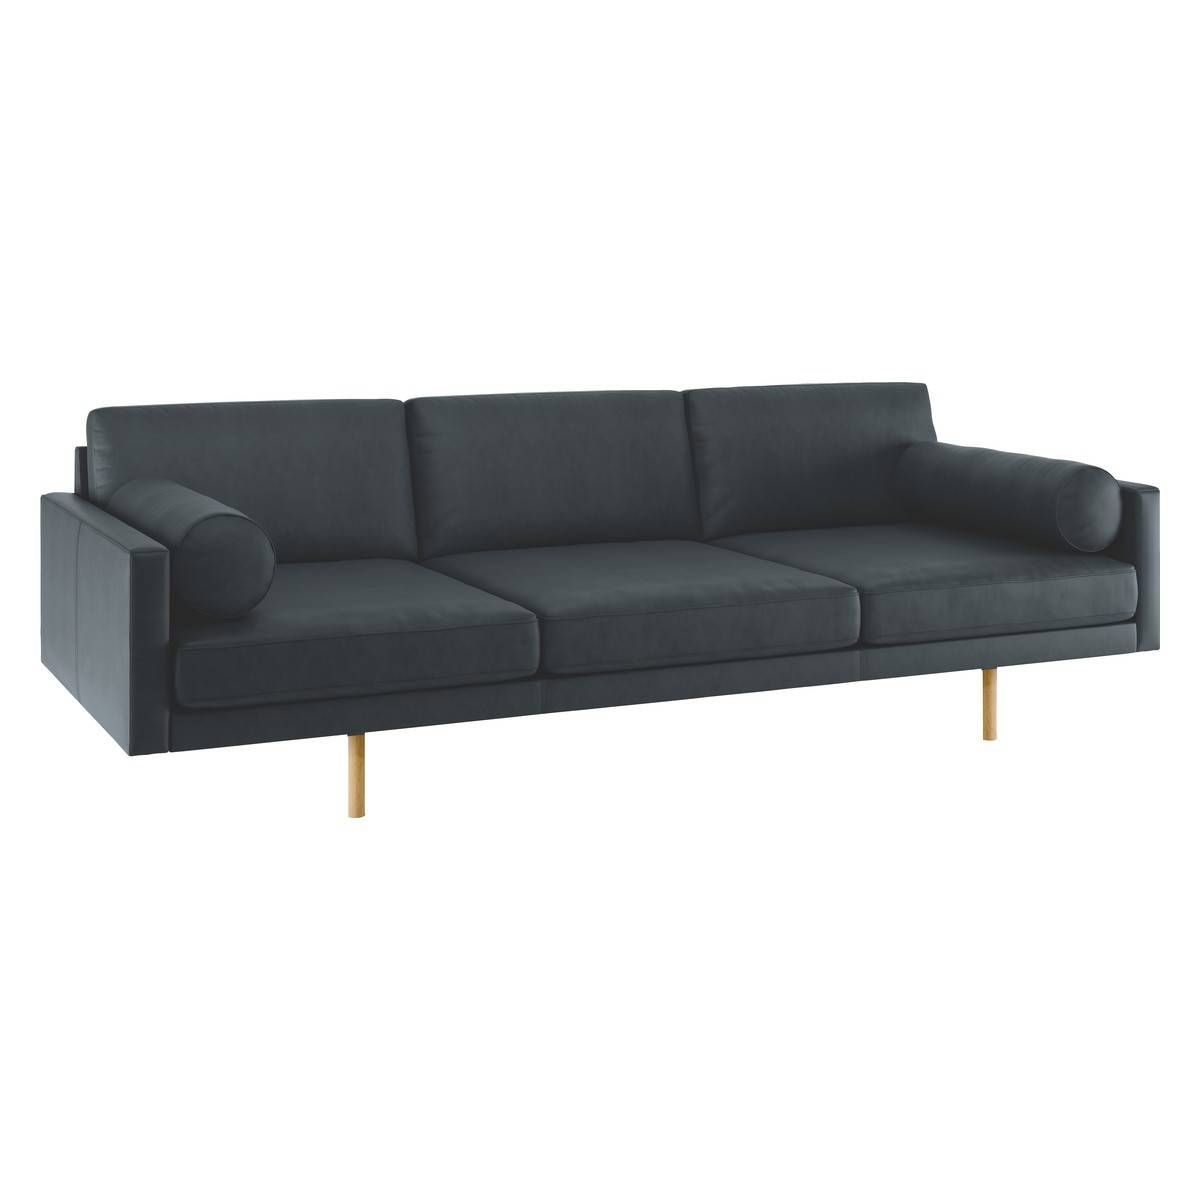 Spencer Dark Grey Luxury Leather 4 Seater Sofa, Oak Legs | Buy Now Within 4 Seater Sofas (View 10 of 30)